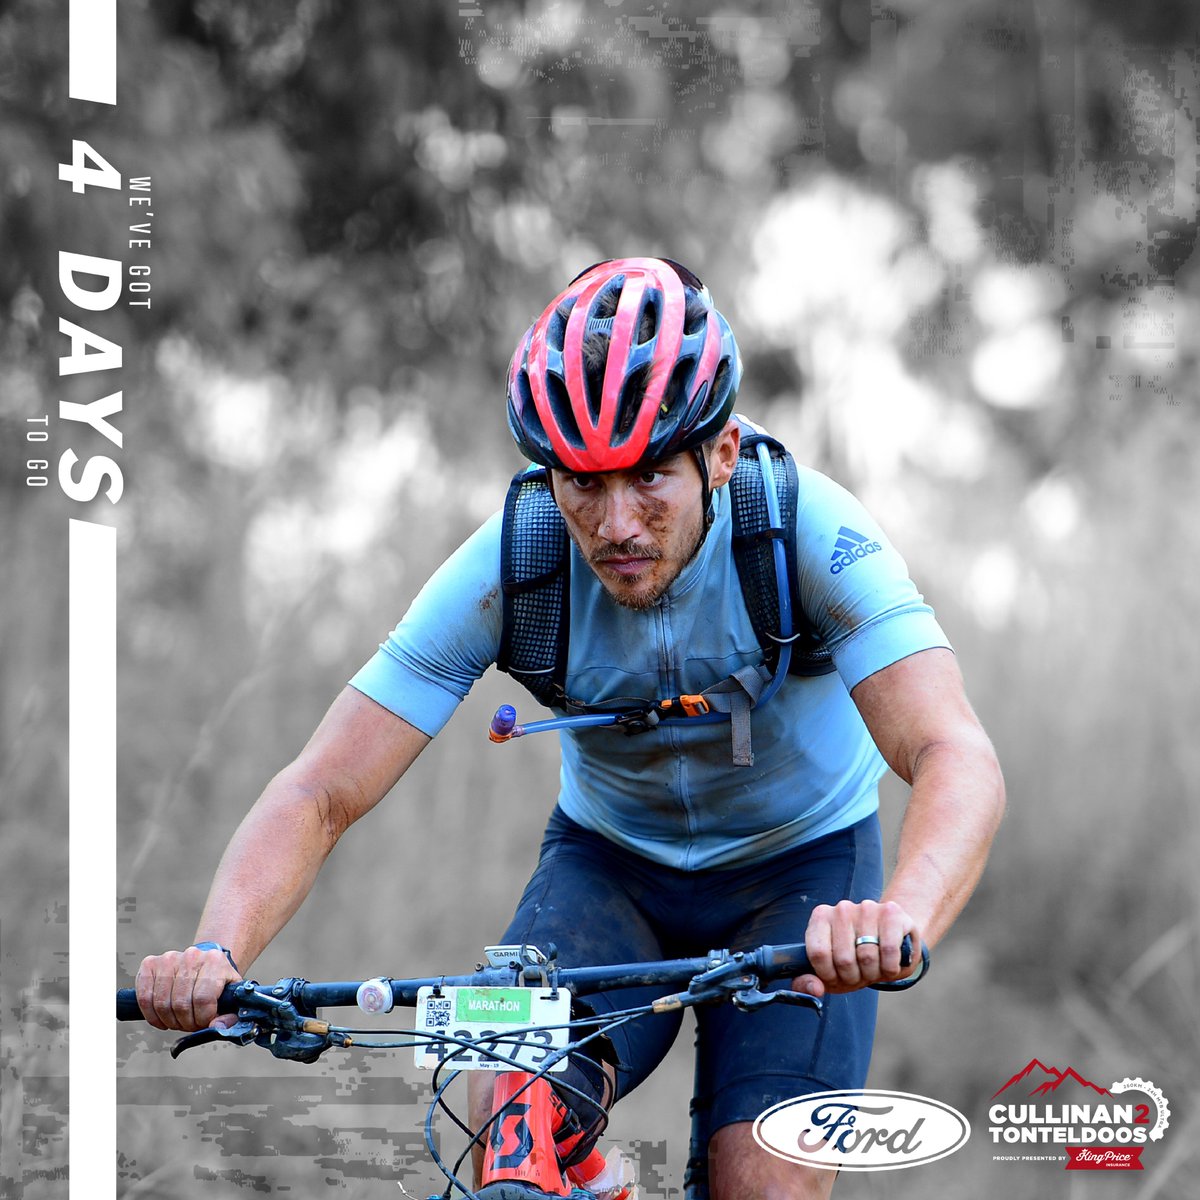 #FordC2TUltra, presented by #KingPrice, starts in 4 days & we're excited to host this (in)famous 260-km gravel journey from Cullinan to Dullies on Sat, 22 April. Even the weather is playing along! Dare to join the madness➡️c2tmtb.co.za 😉 #ToughestGravelGrinderSA #Ford